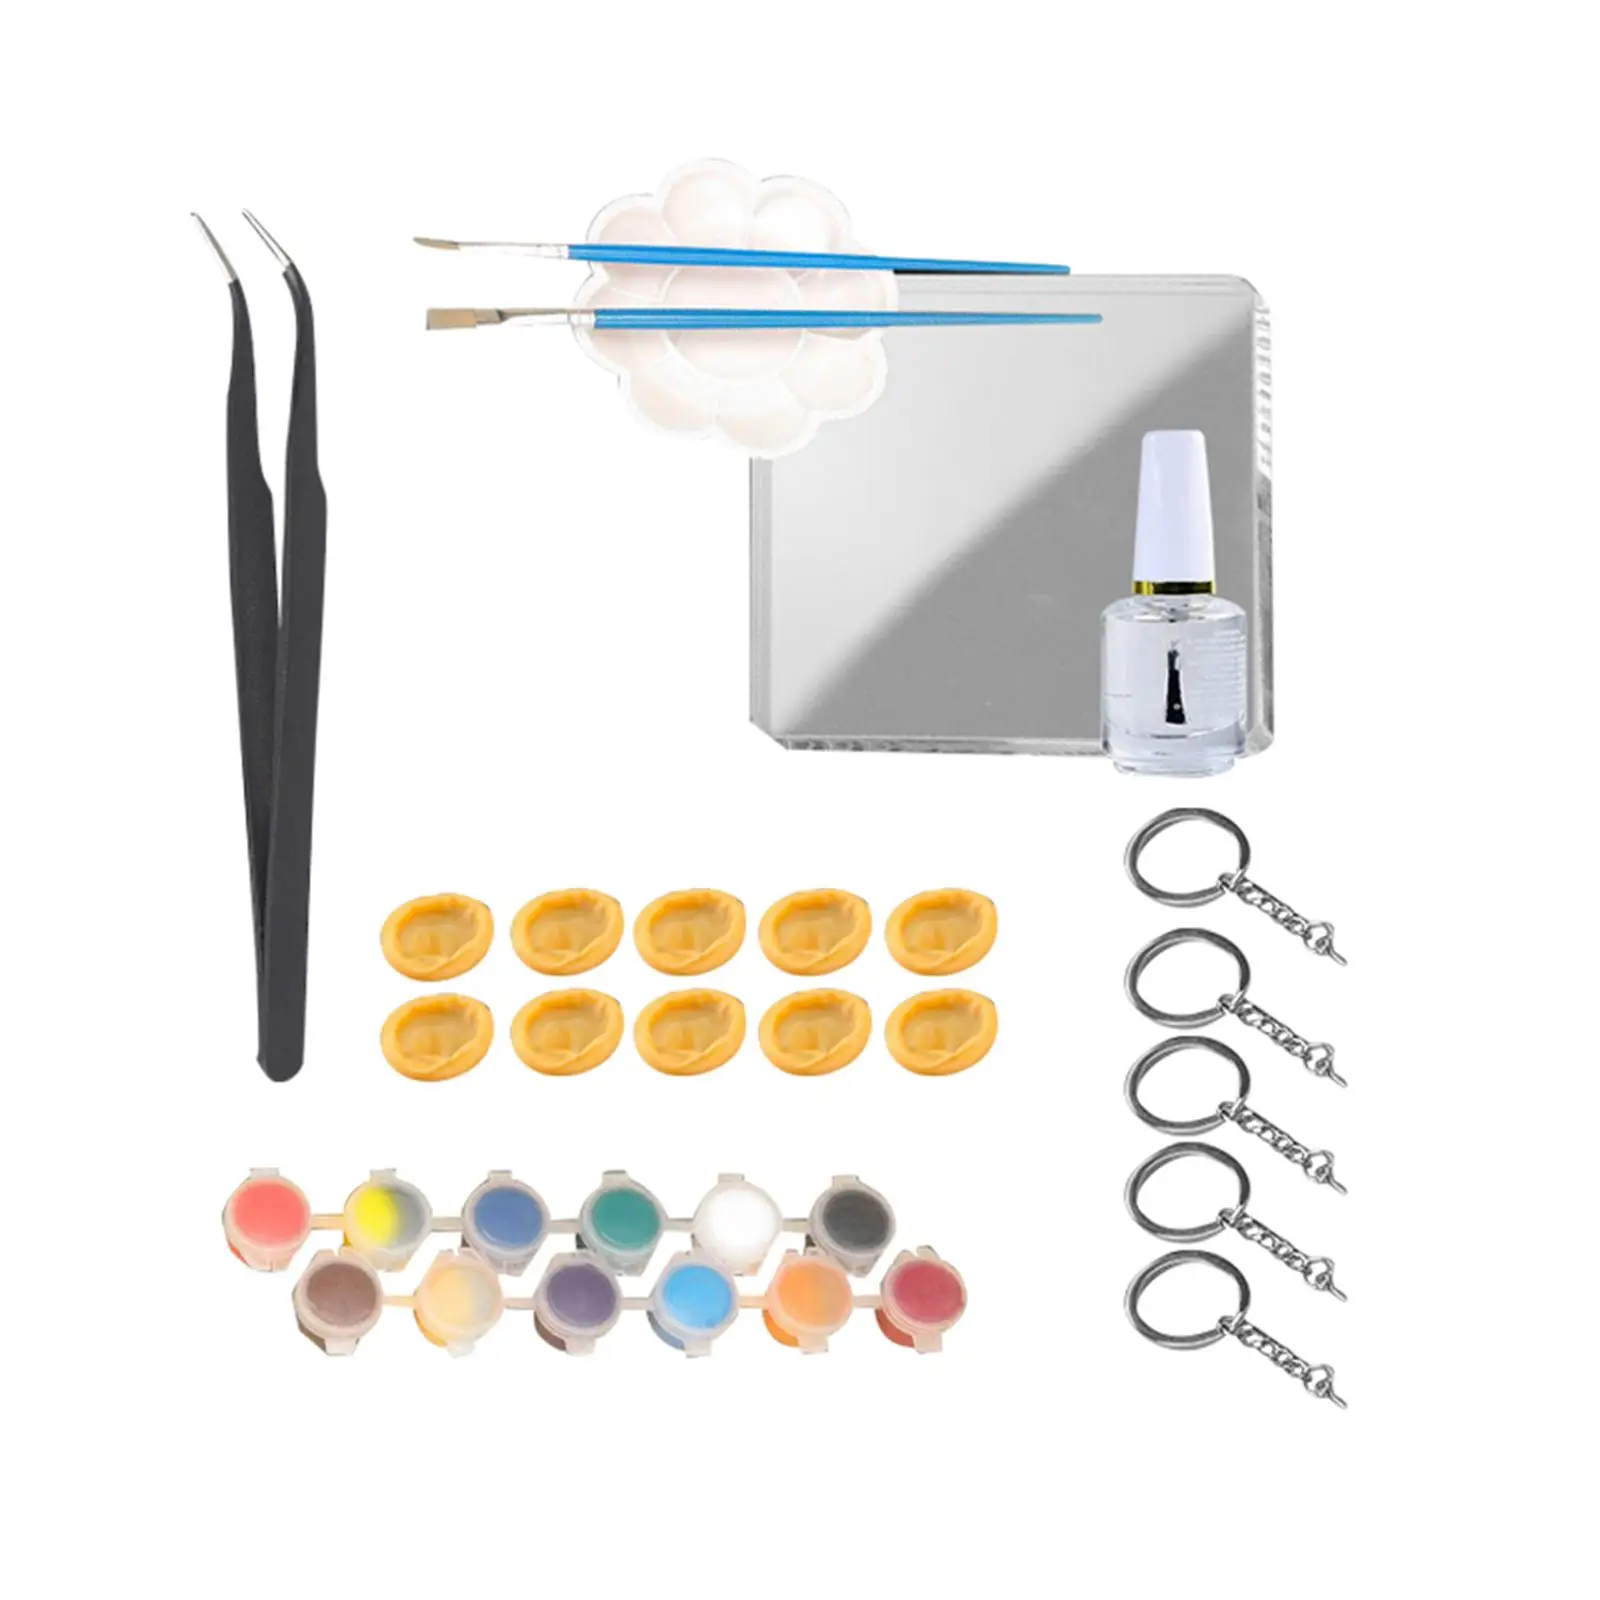 Polymer Clay DIY Tool Set Acrylic Pigment Material Art Crafts for Craft Jewelry Making Resin Casting Modeling Sculpting Students